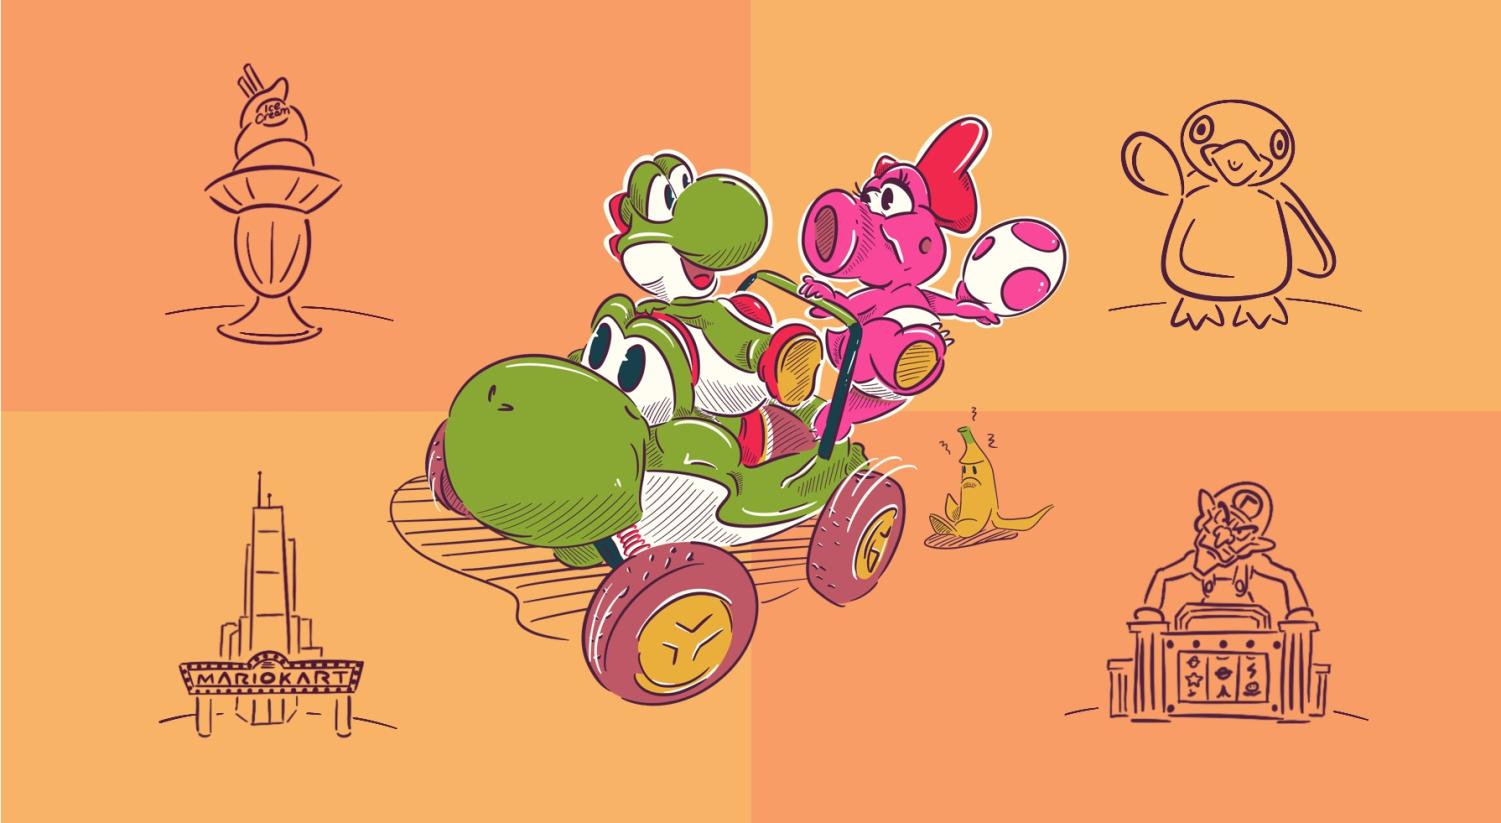 These characters I want to see in Mario kart tour